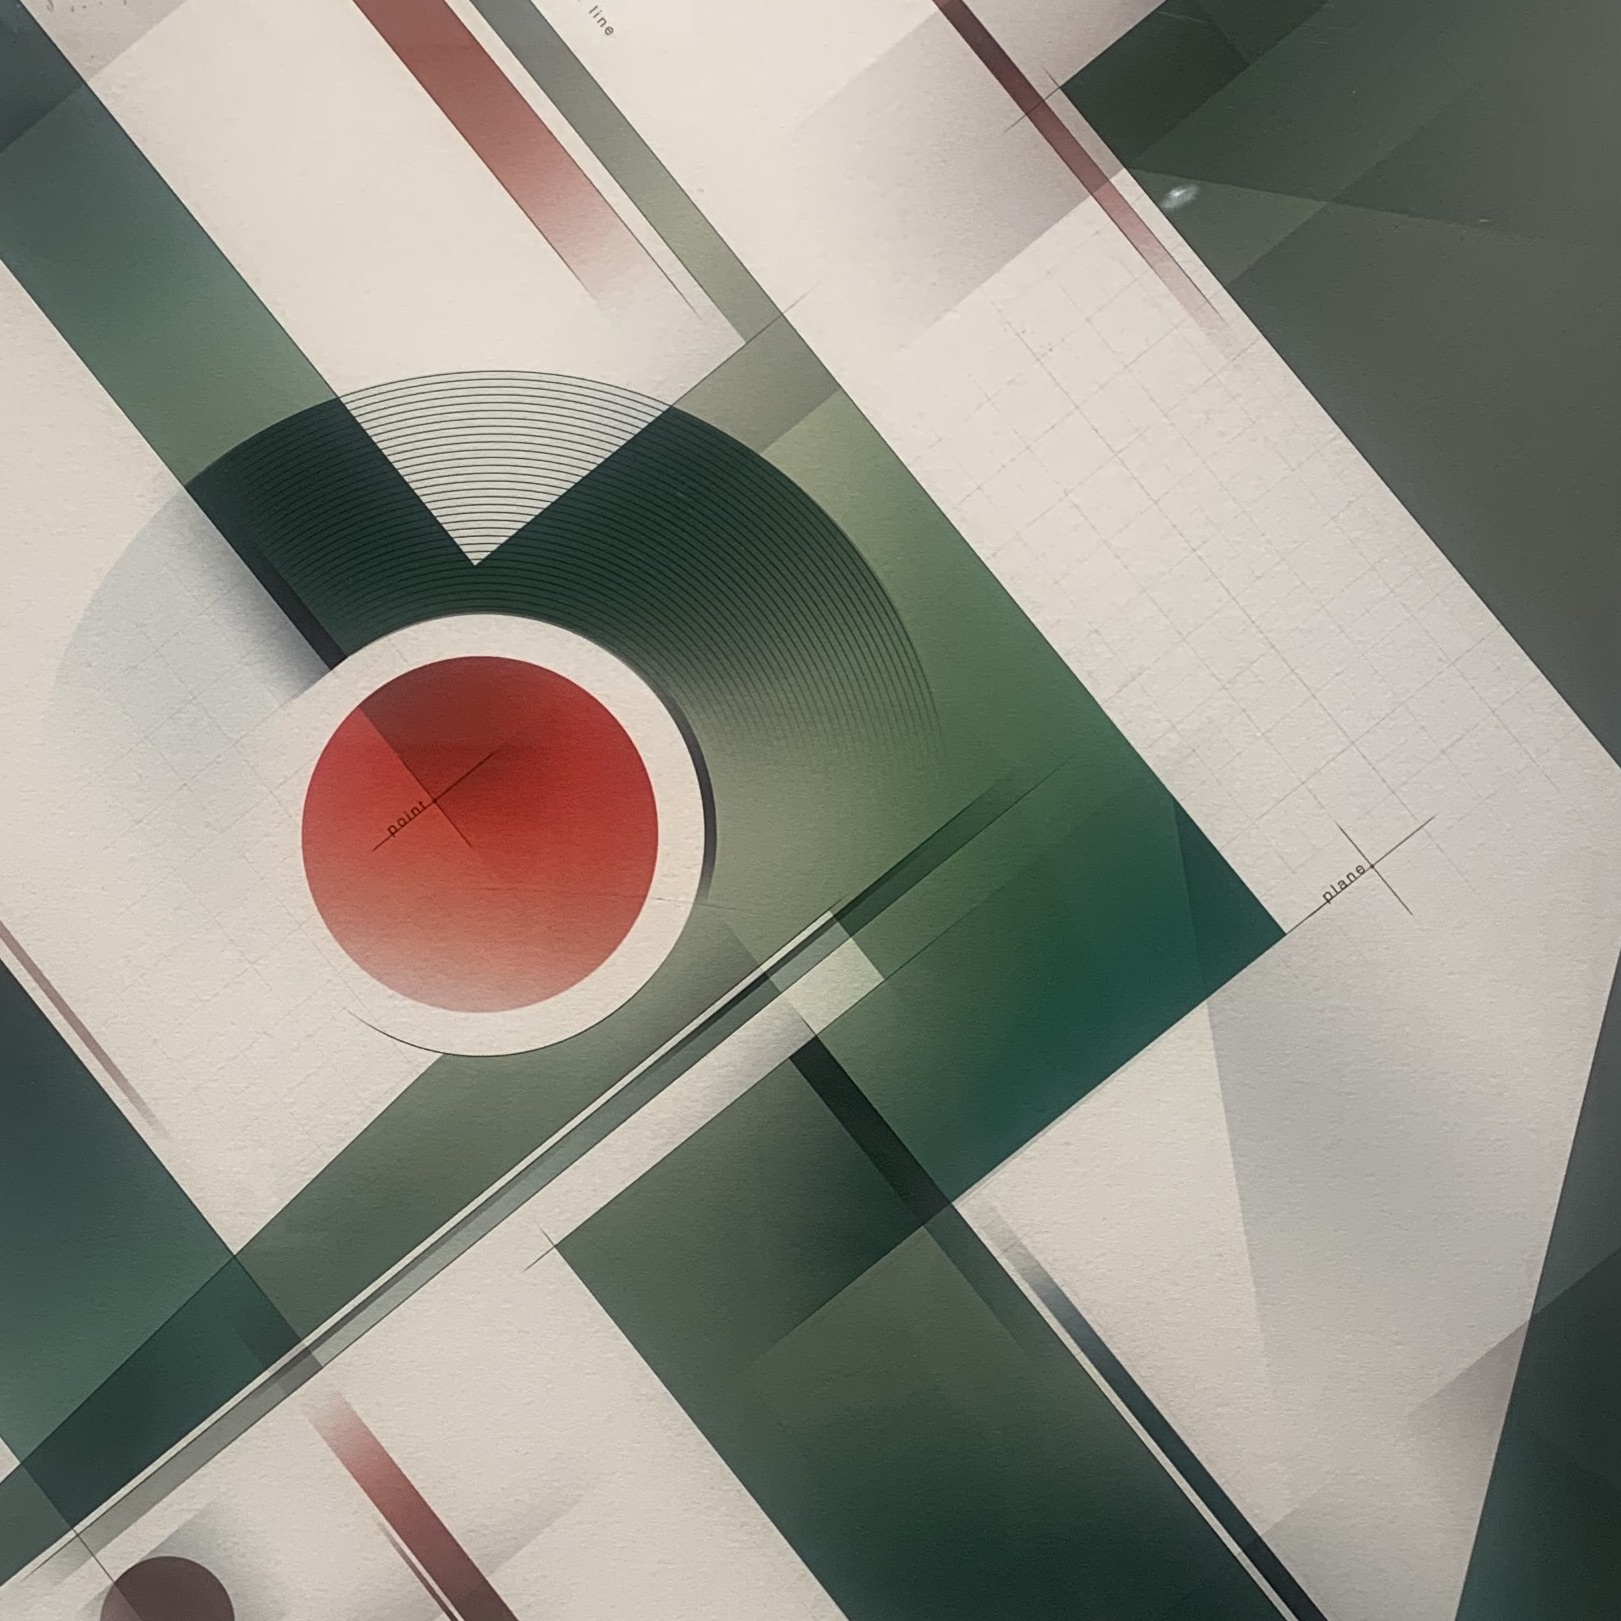 Point, Line, and Plane # 9: Image description: Green, white, and red geometric artwork